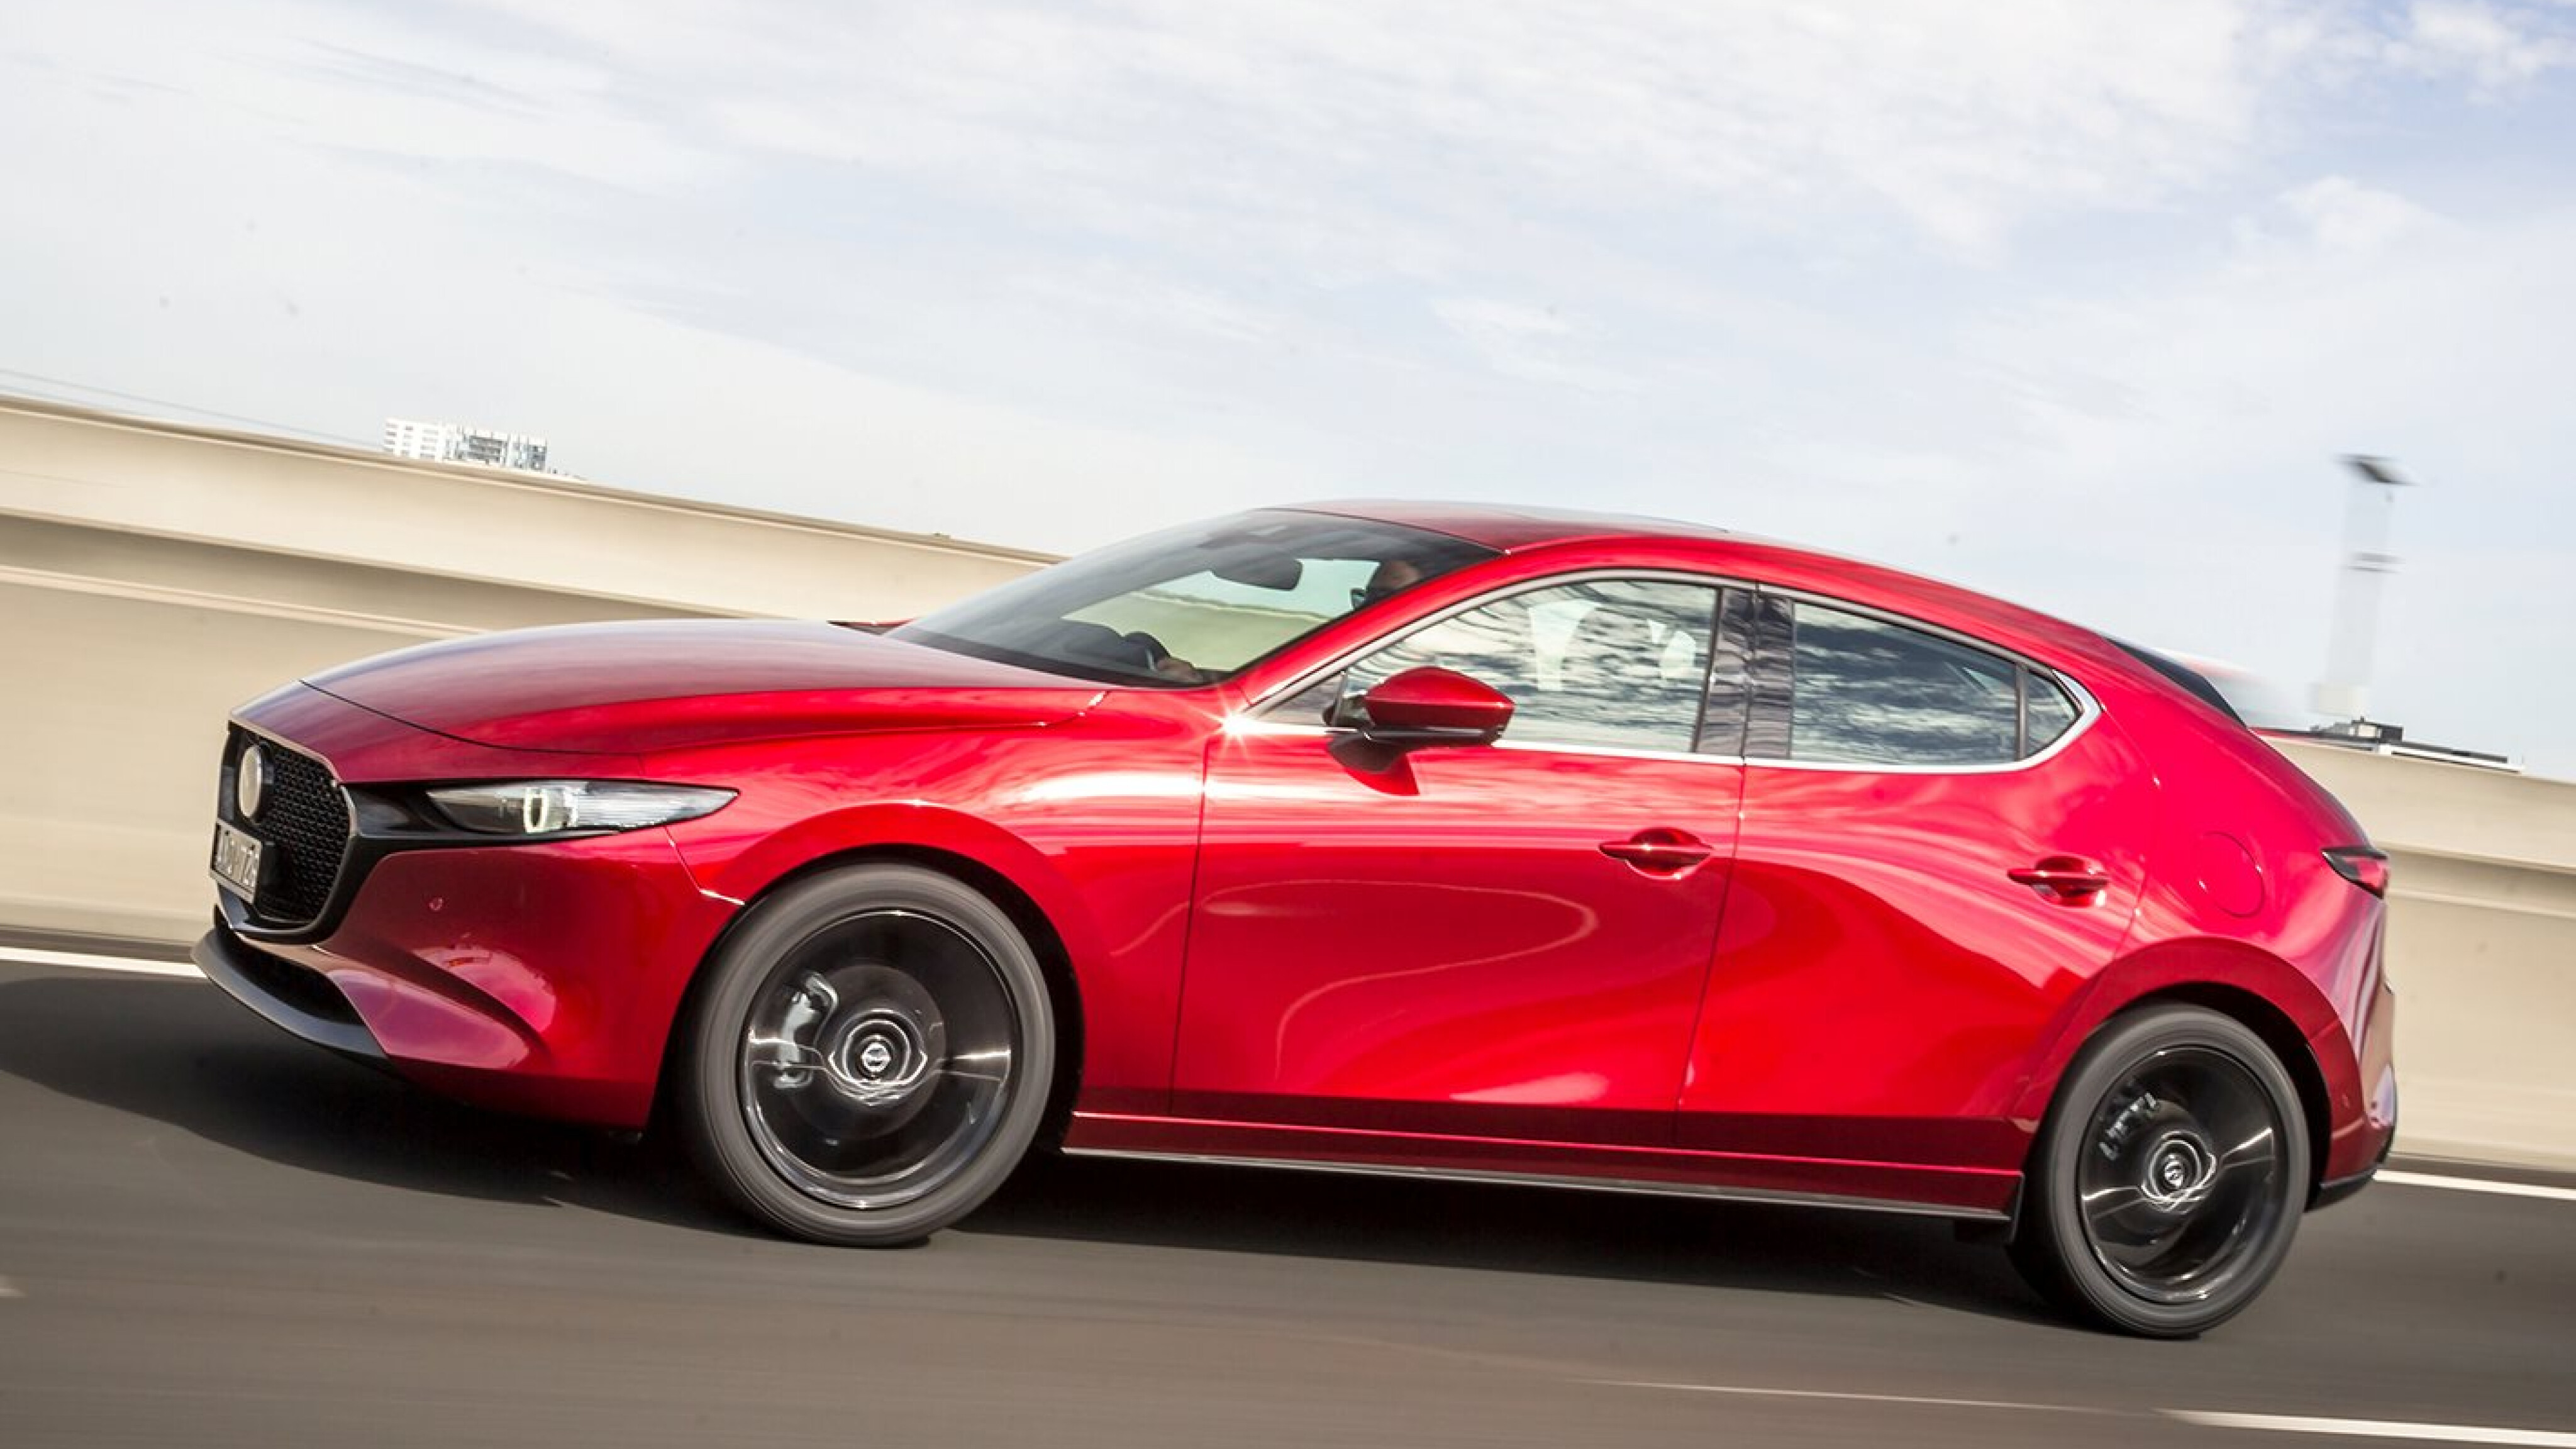 2019 Mazda 3 Pricing: Engine and Content Upgrades Carry a Premium